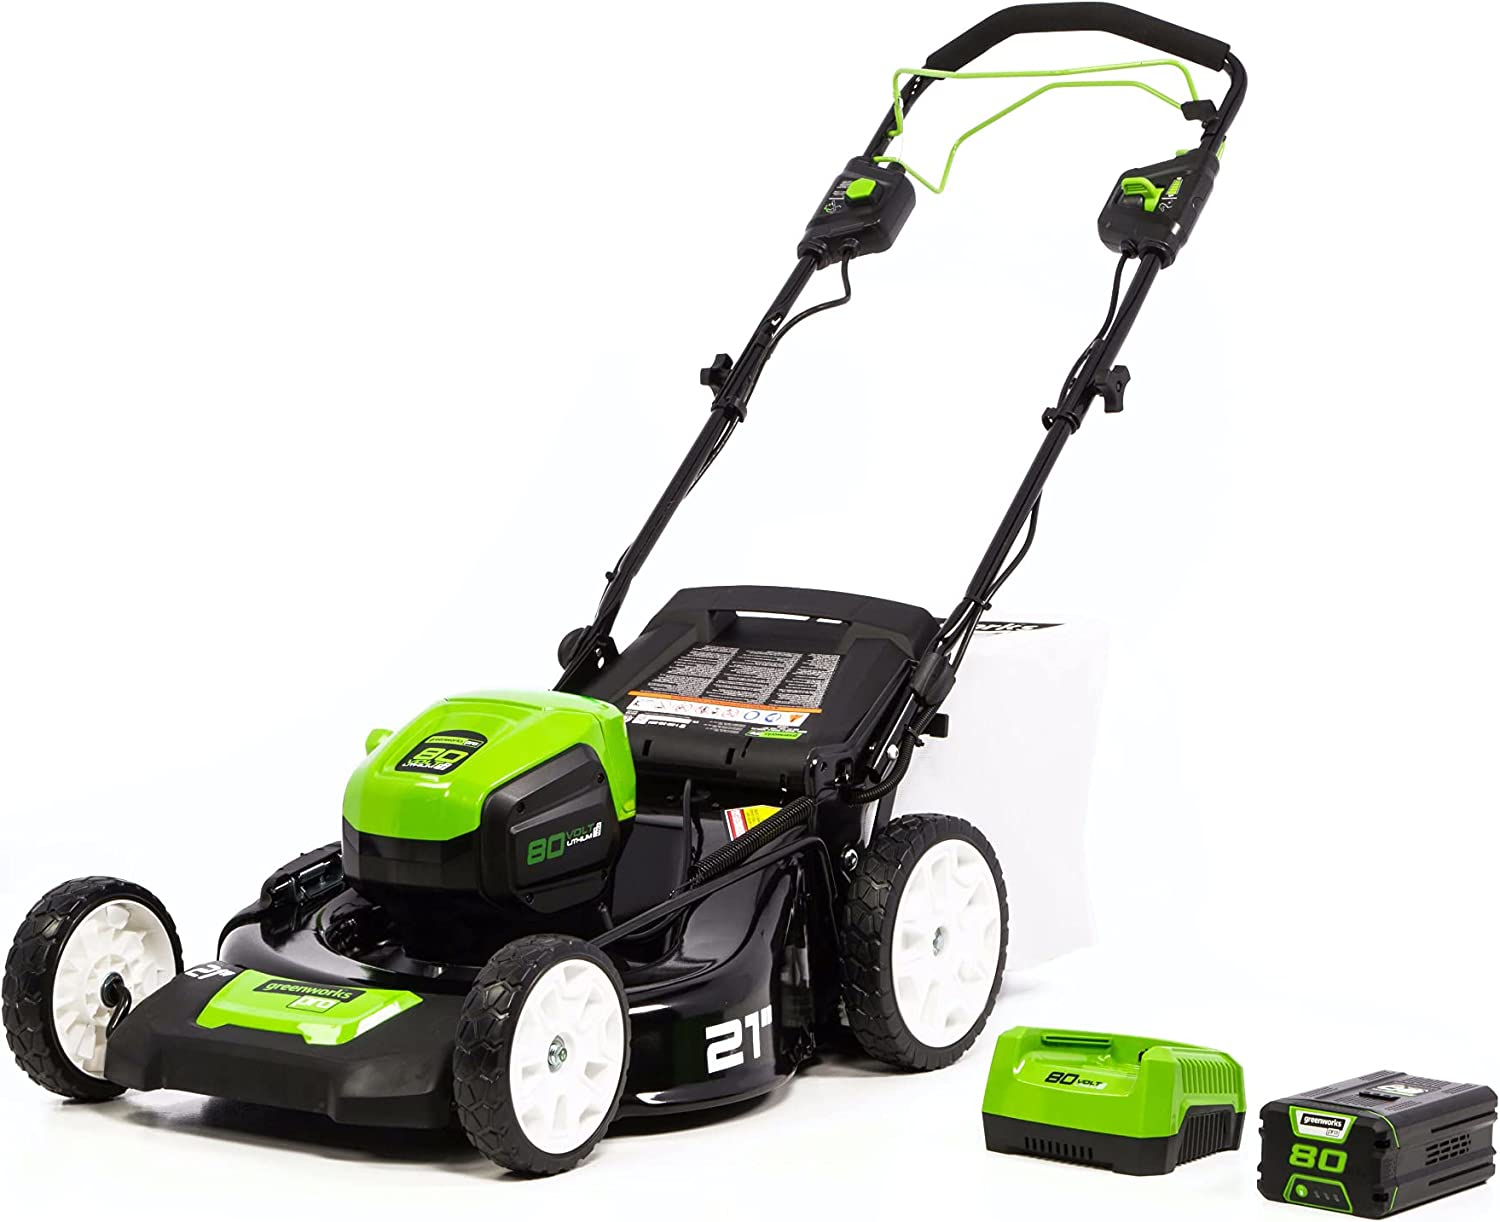 Deal of the day: Greenworks Pro 80V 21-Inch Brushless Self-Propelled Lawn Mower 4.0Ah Battery and Charger Included, MO80L410 - $412